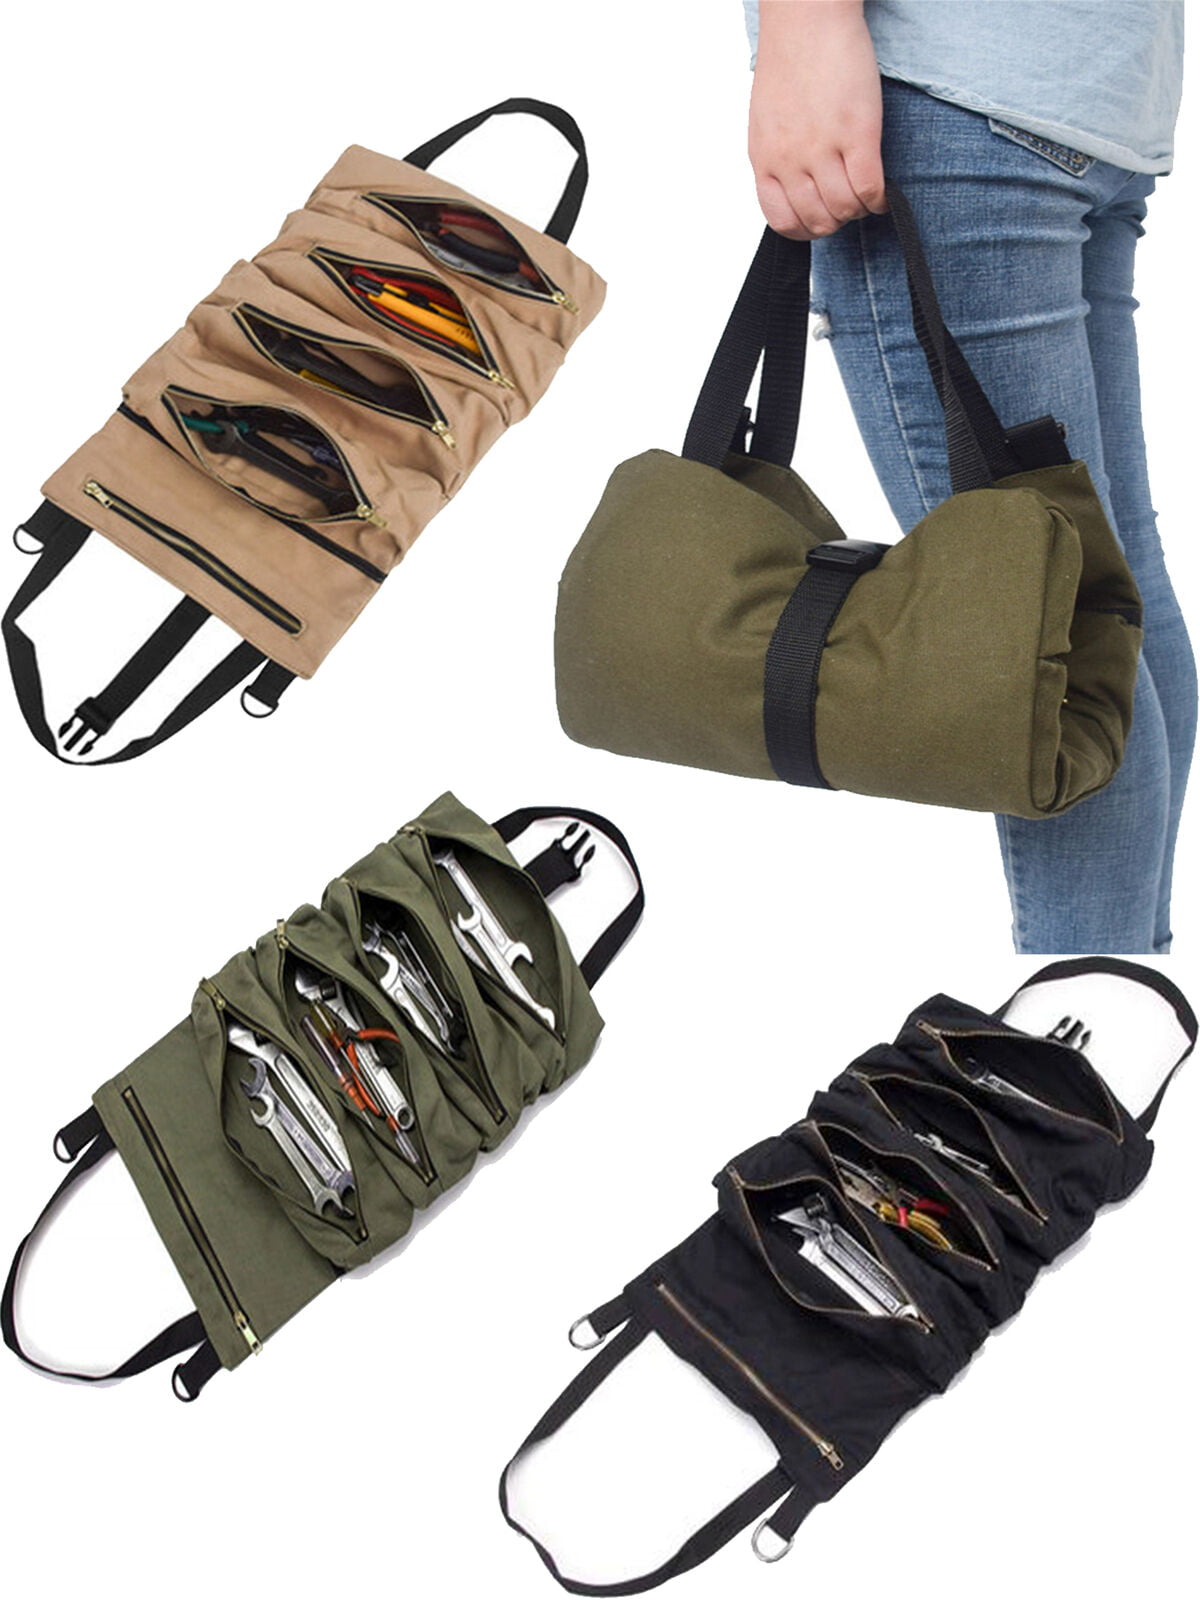 Super Pouch Organizer Tool Wrench Canvas Multi-function Hanging Tool Roll Up 